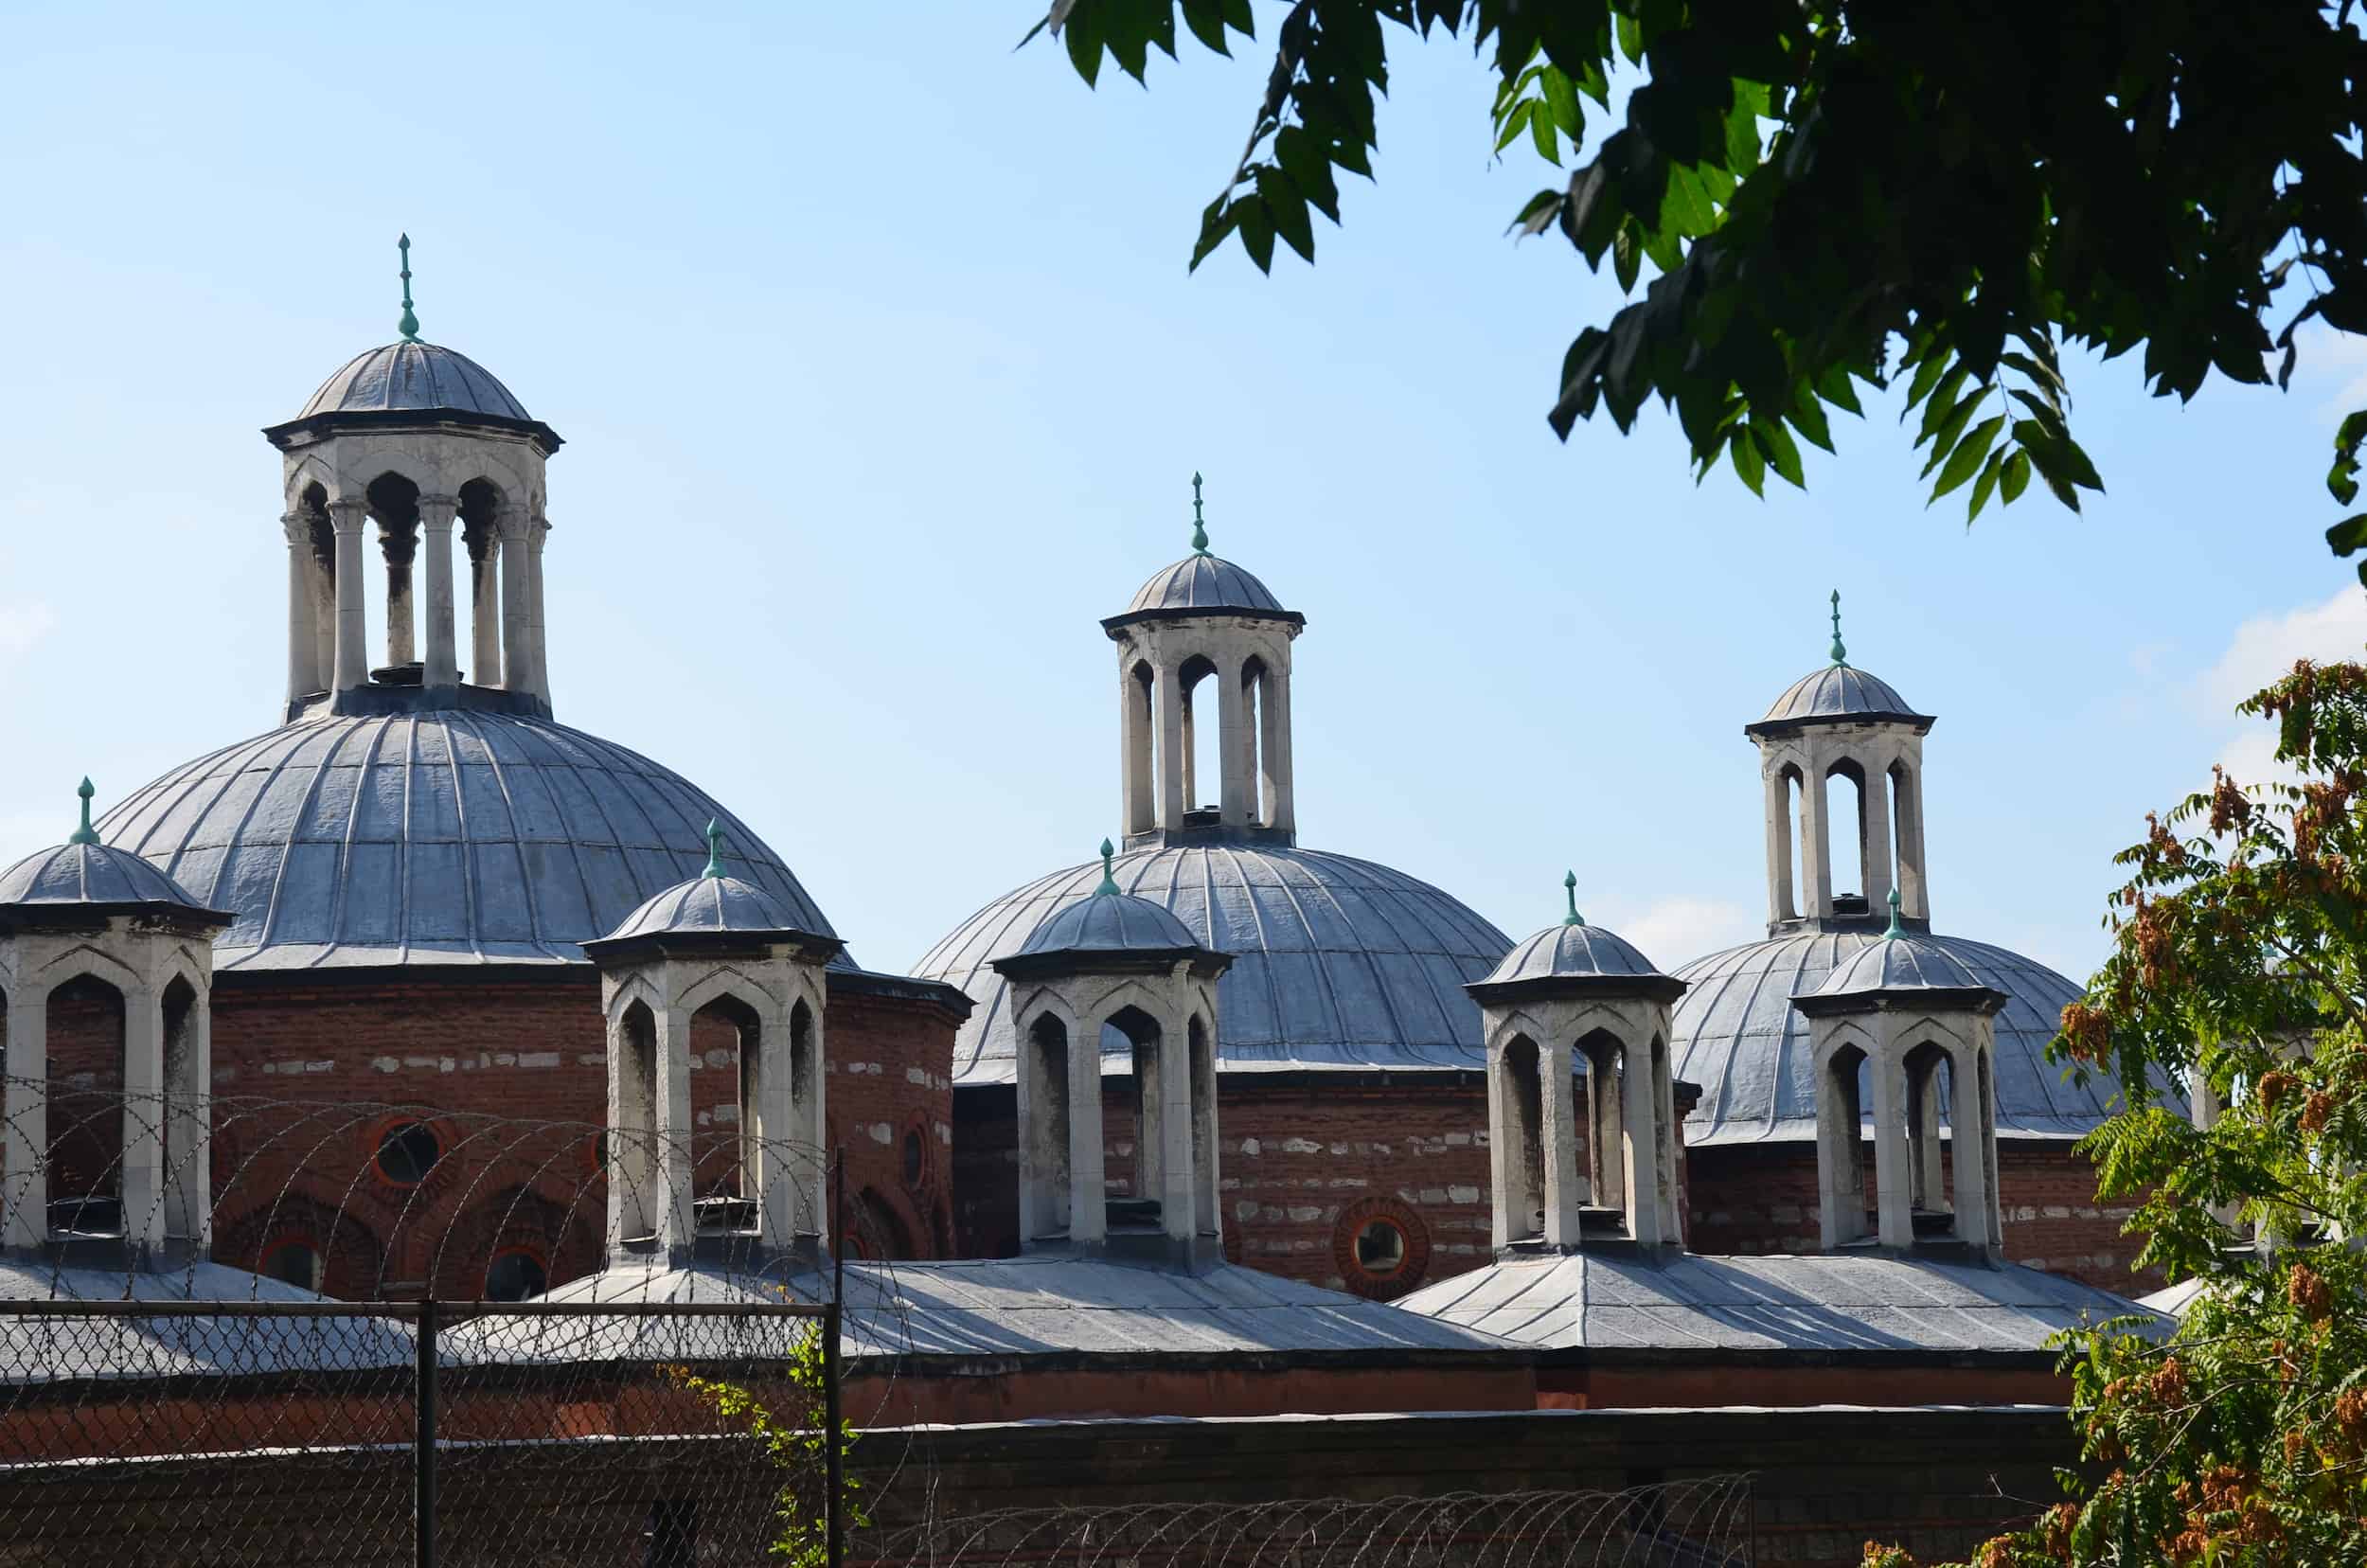 Five Domes building at Tophane-i Amire Culture and Art Center in Tophane, Istanbul, Turkey